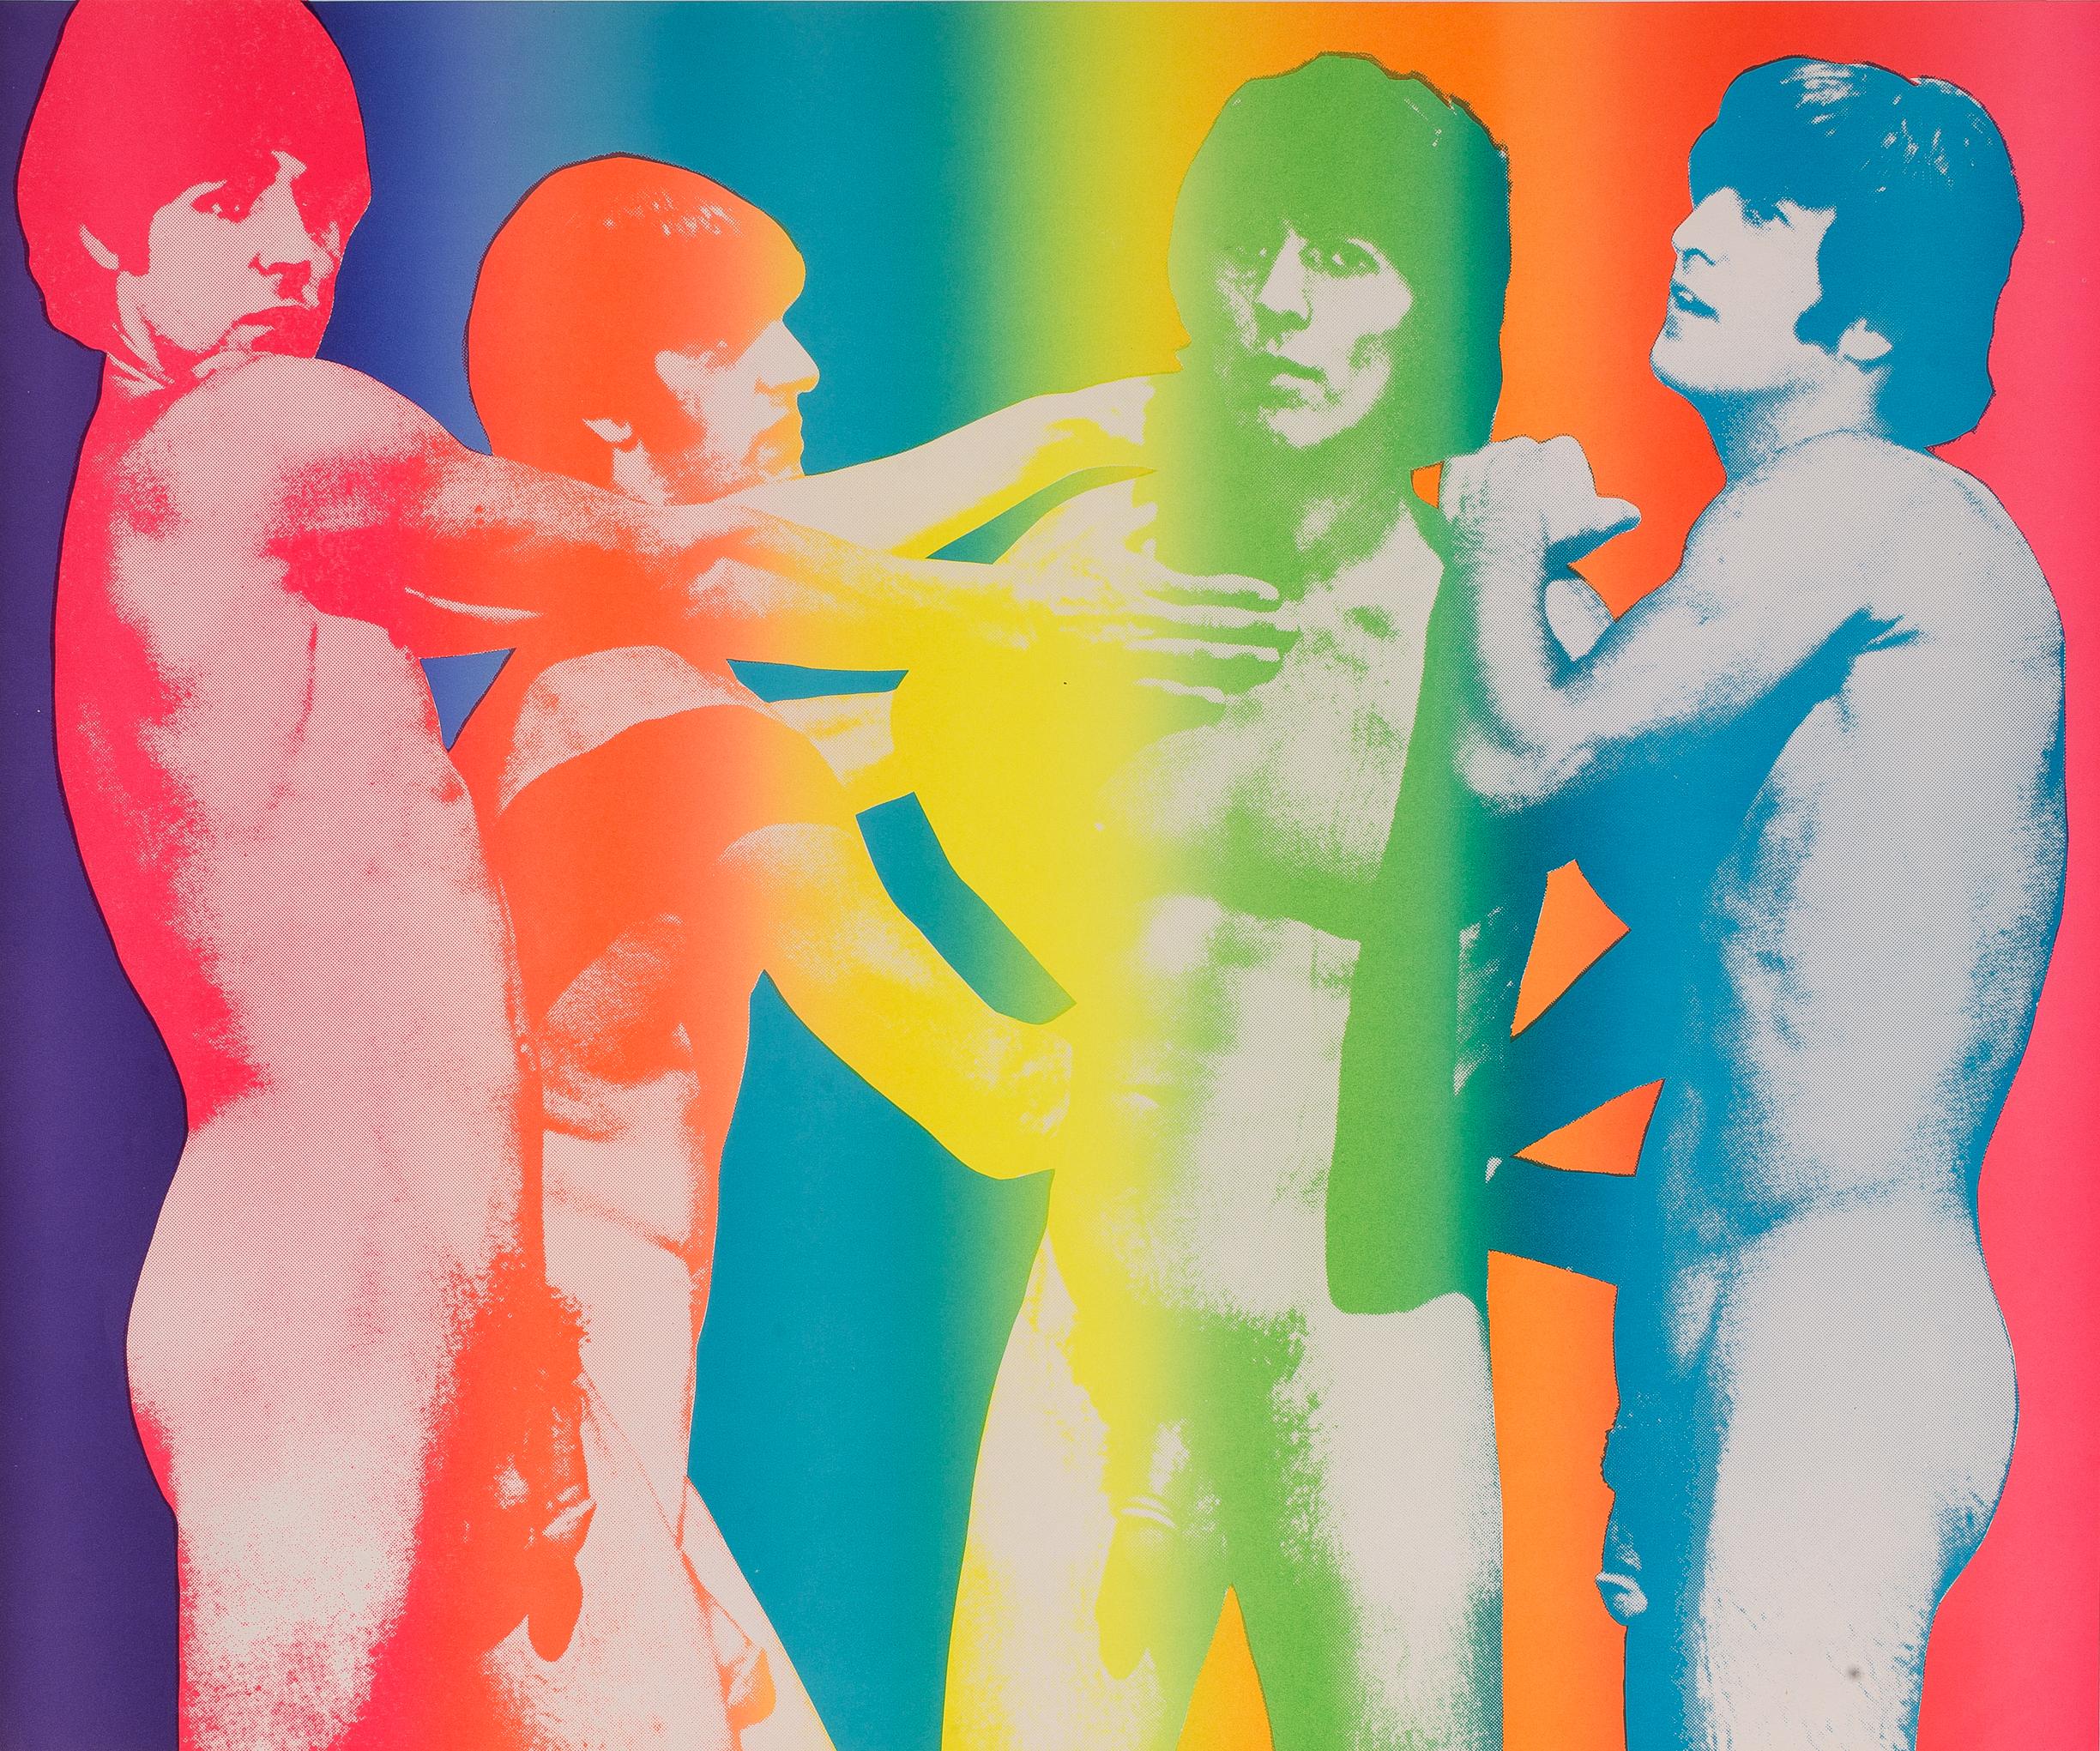 The Beatles Nude lithograph 1969 - Print by Richard Bernstein